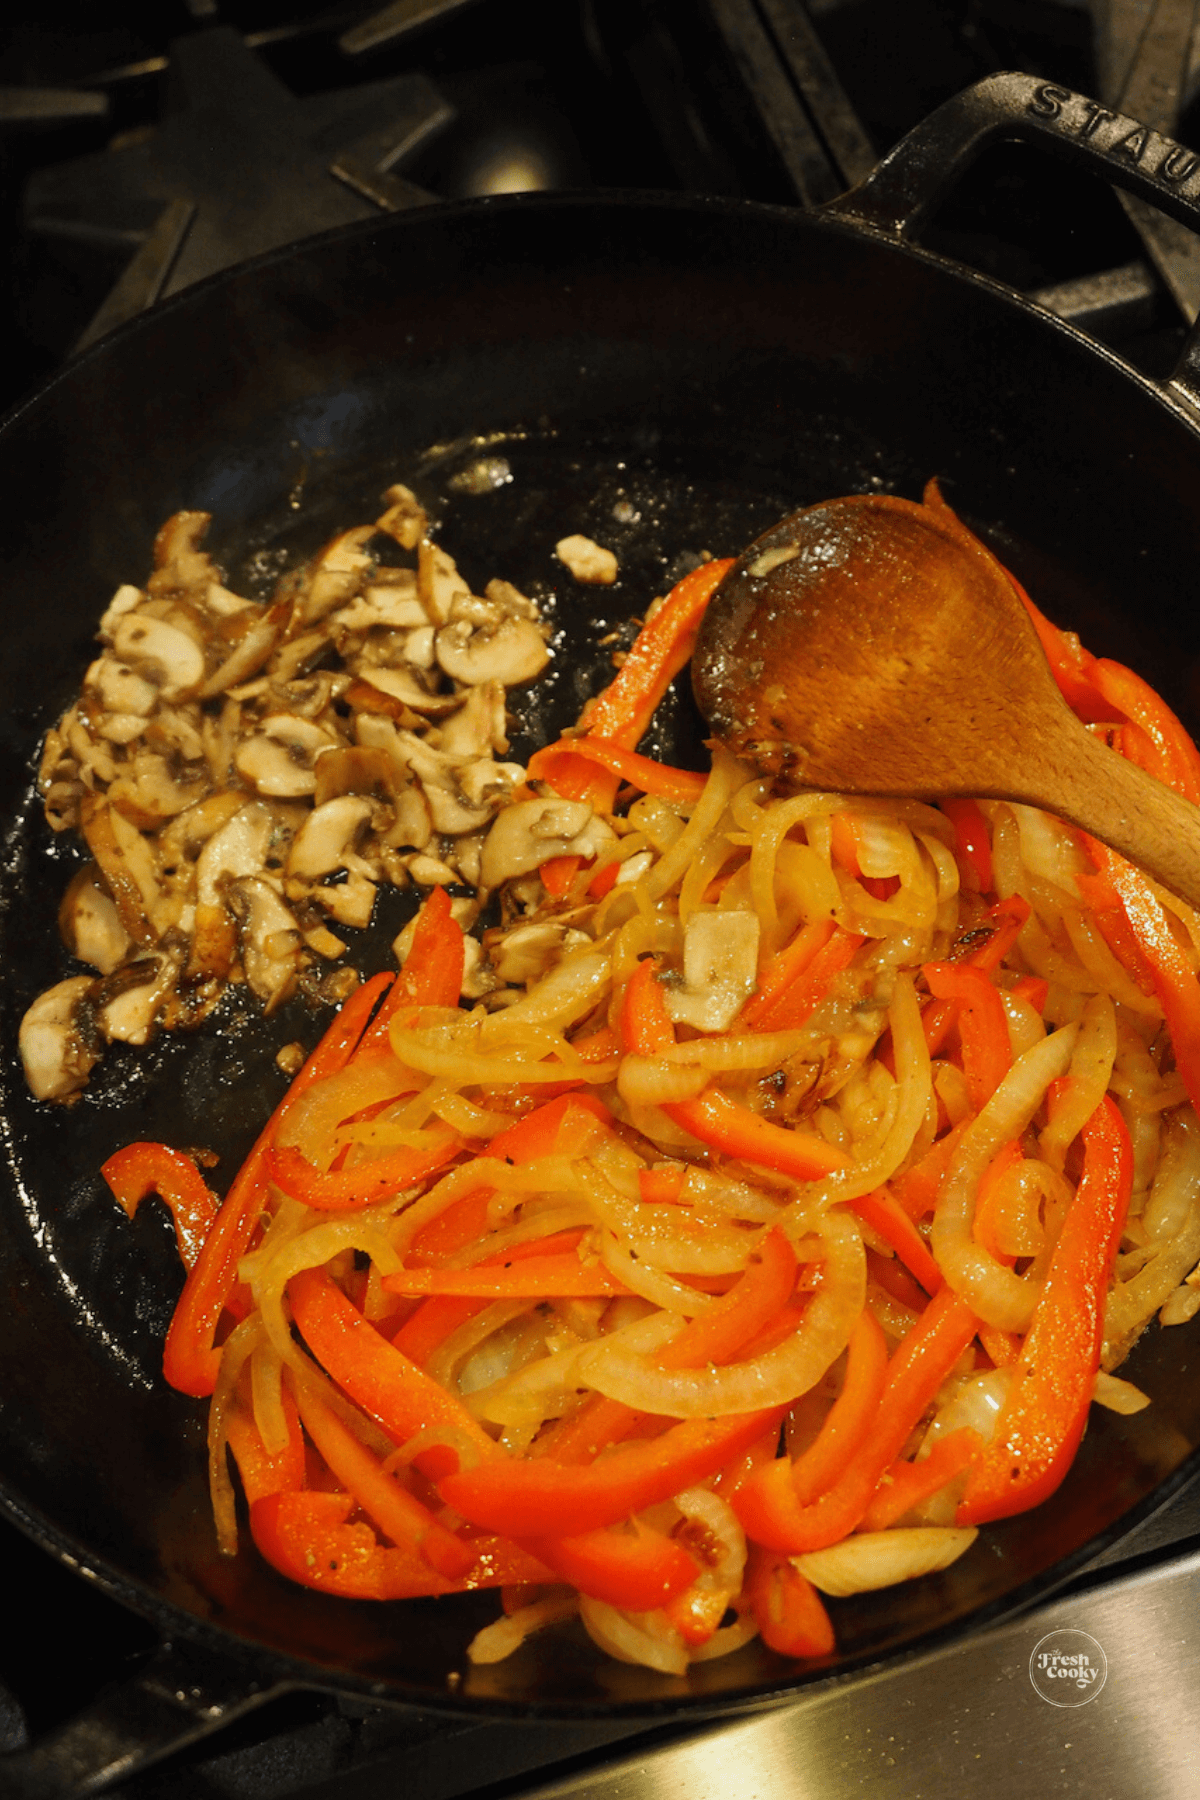 Saute mushrooms in same skillet with peppers and onions.